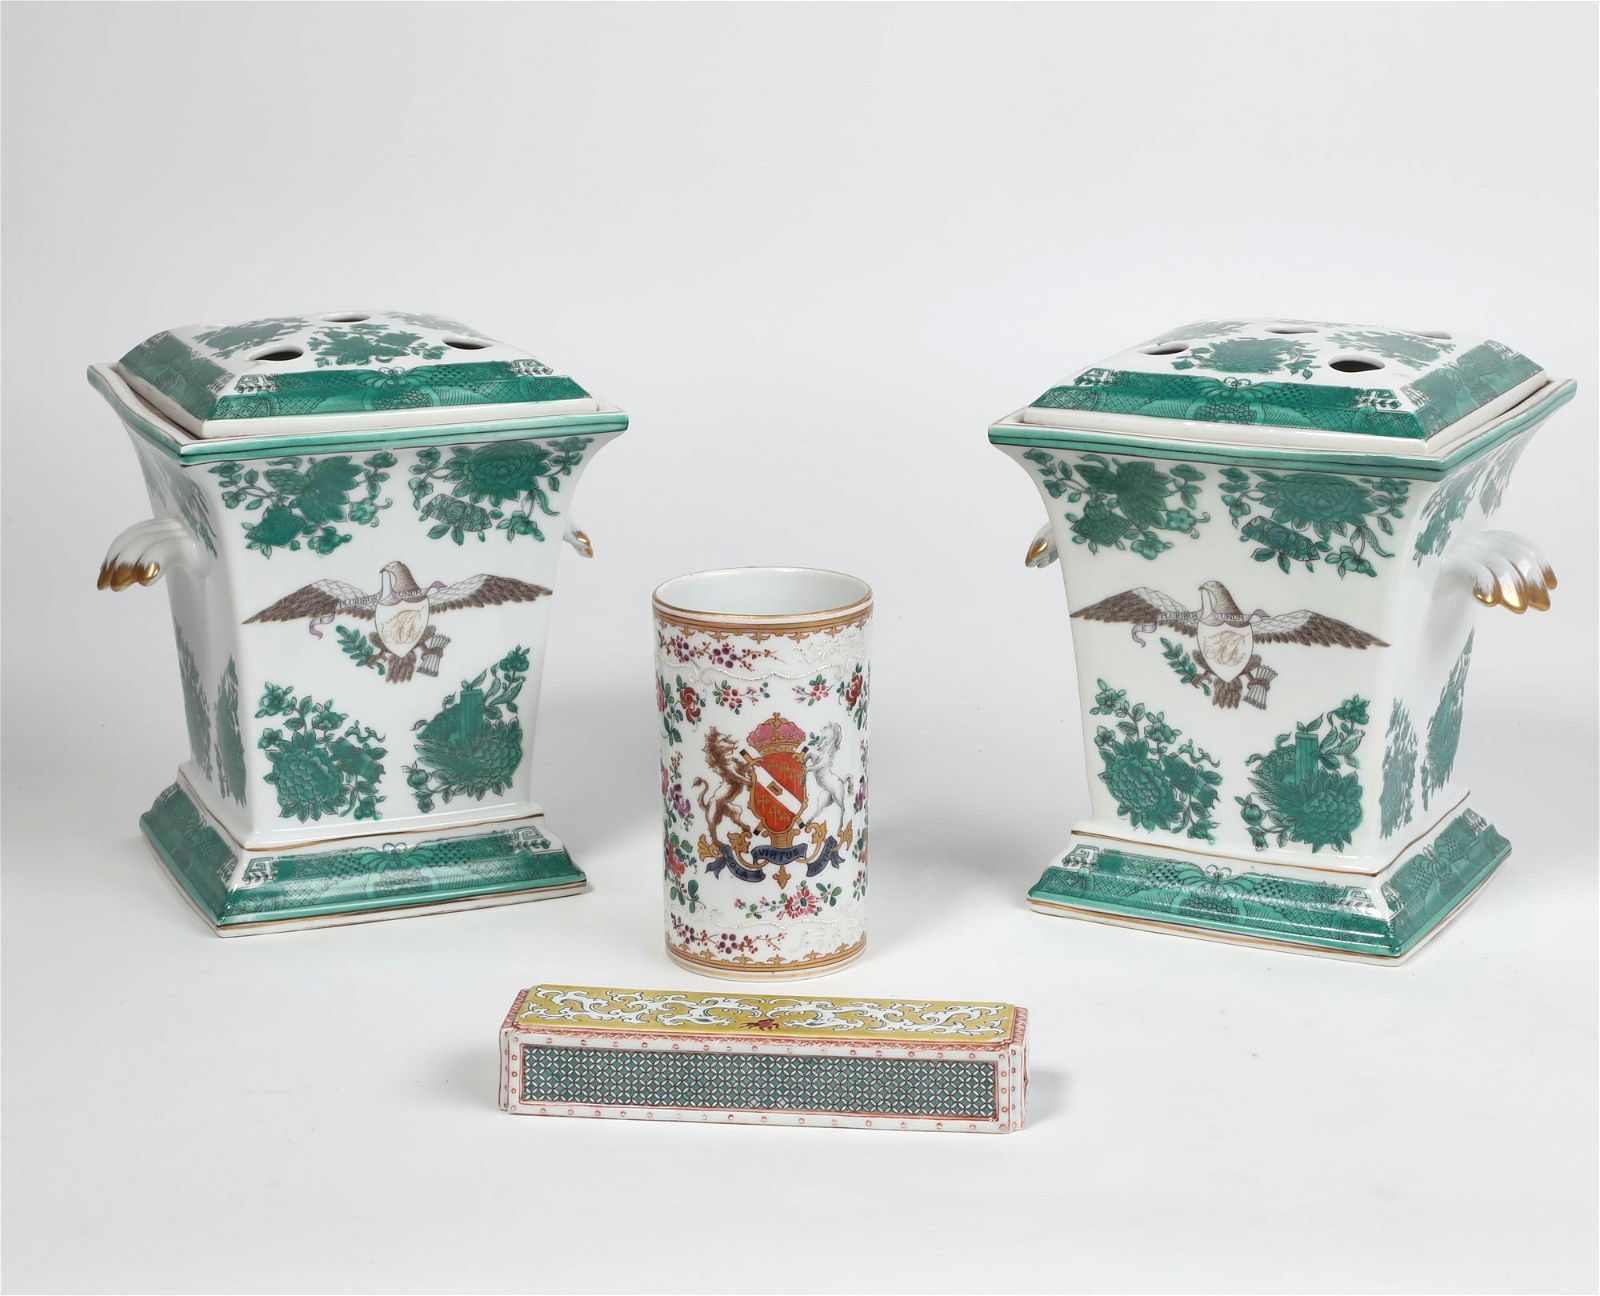 FOUR CHINESE GLAZED PORCELAIN TABLE